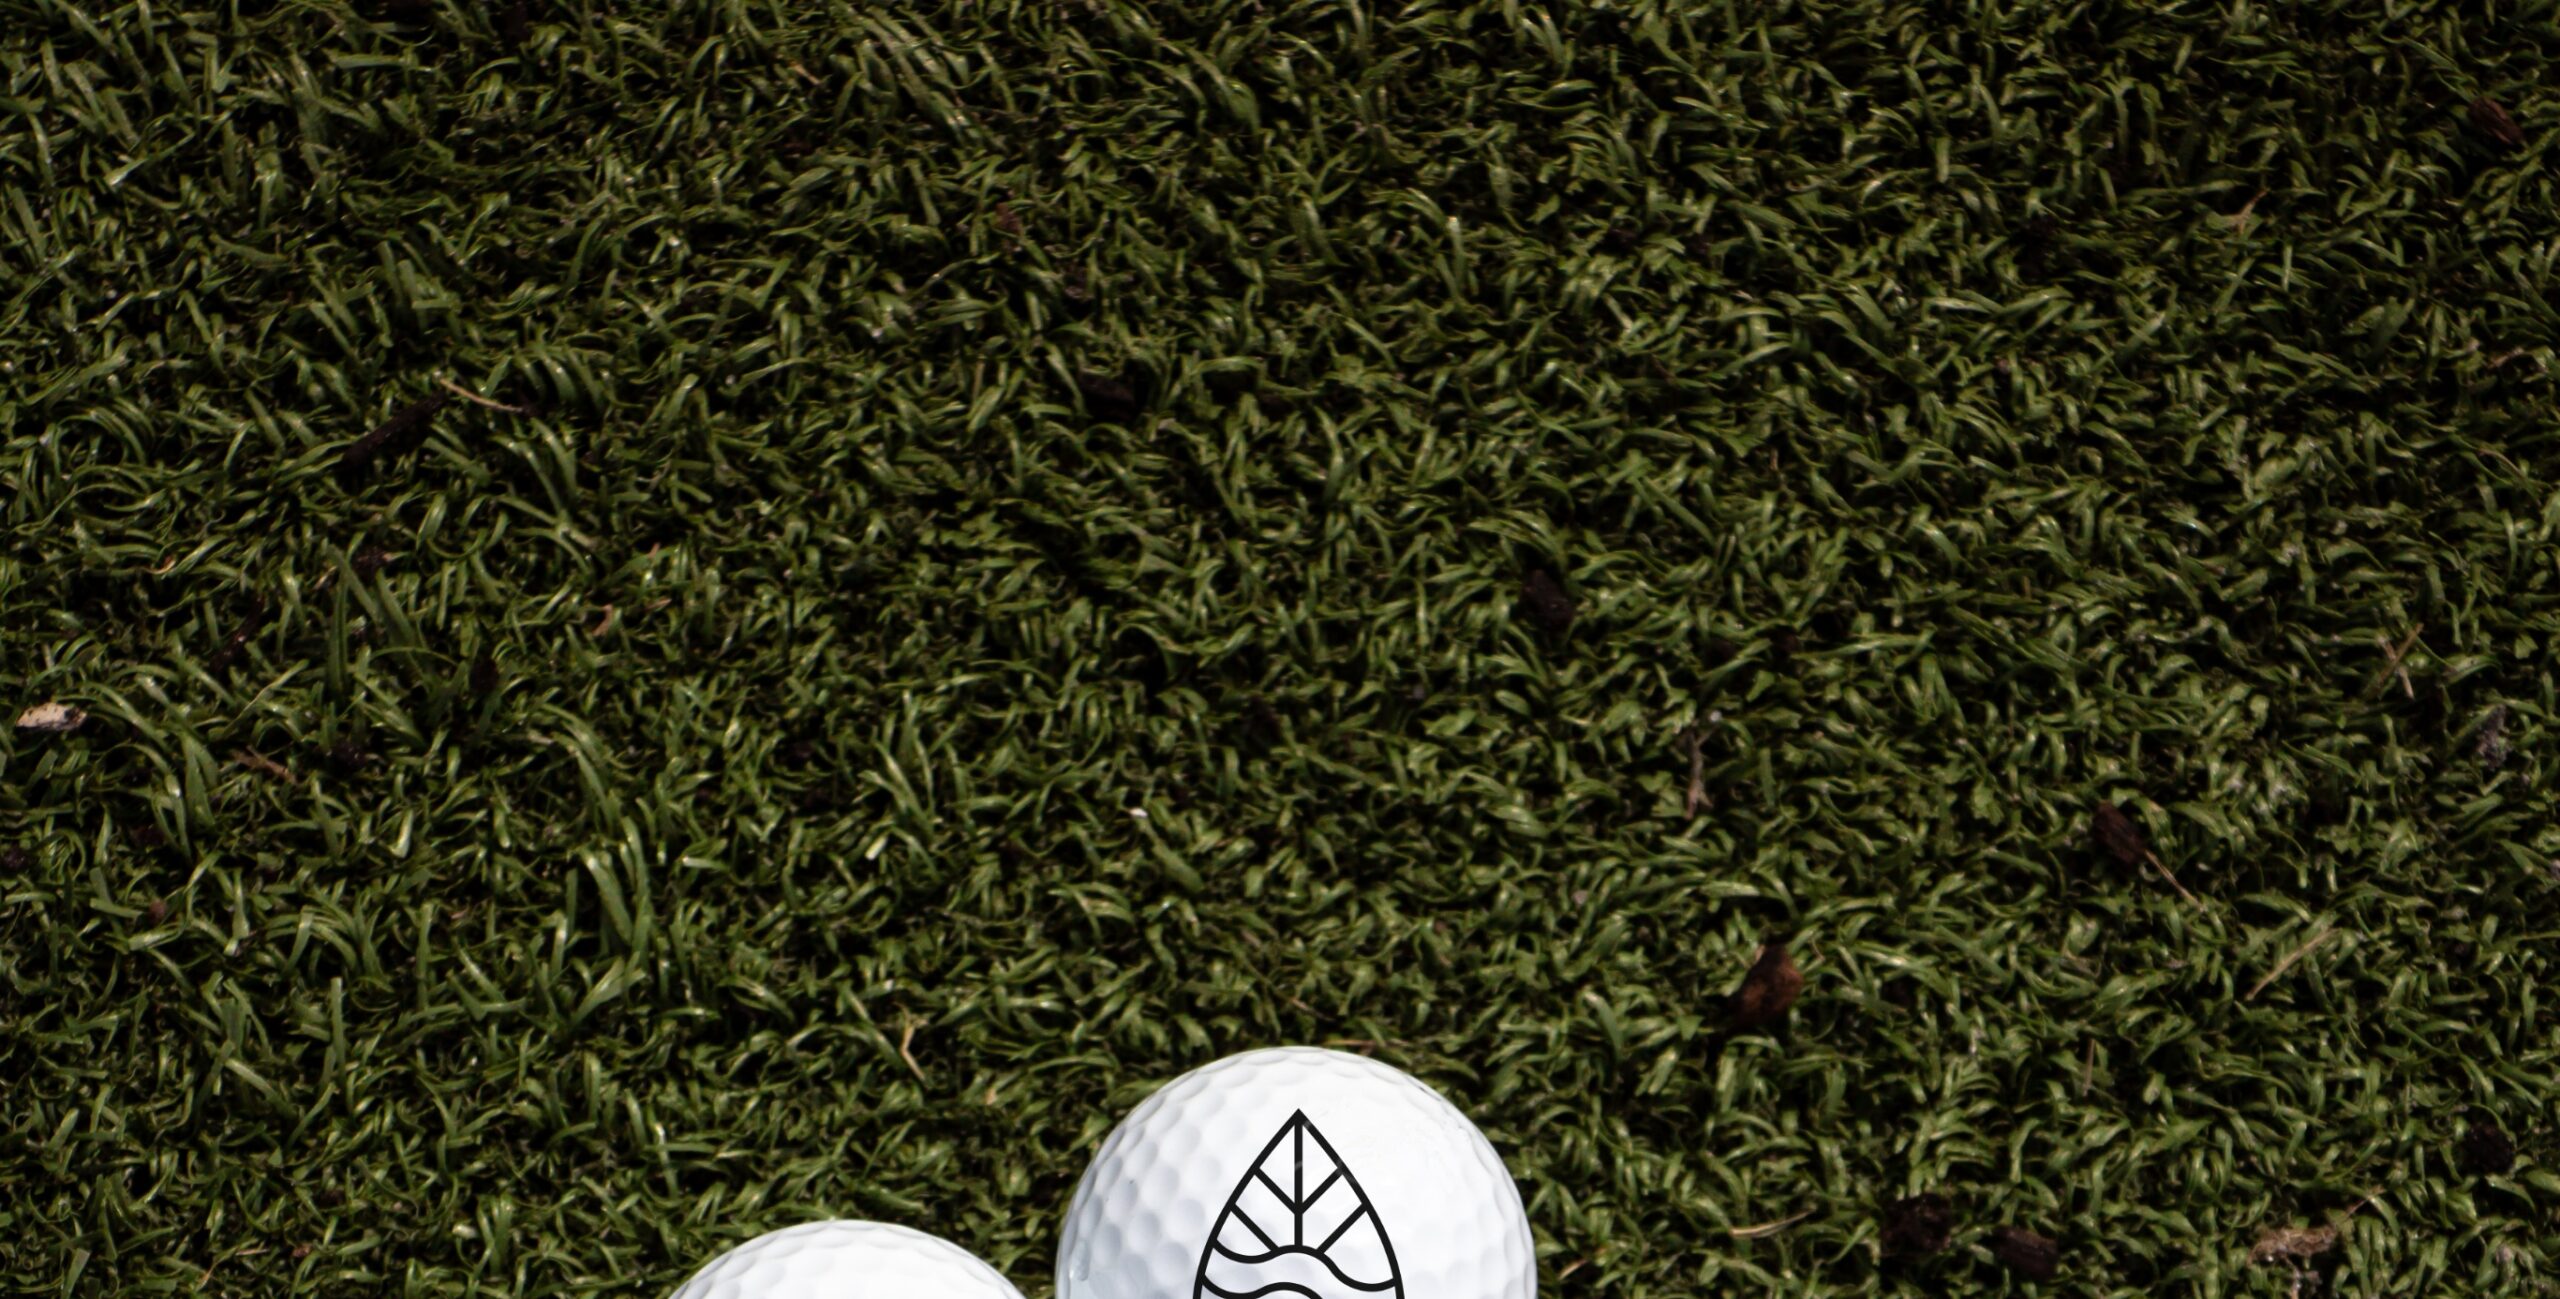 A pair of white golf shoes with a design on them, perfect for playing at the Saltleaf Golf Preserve.